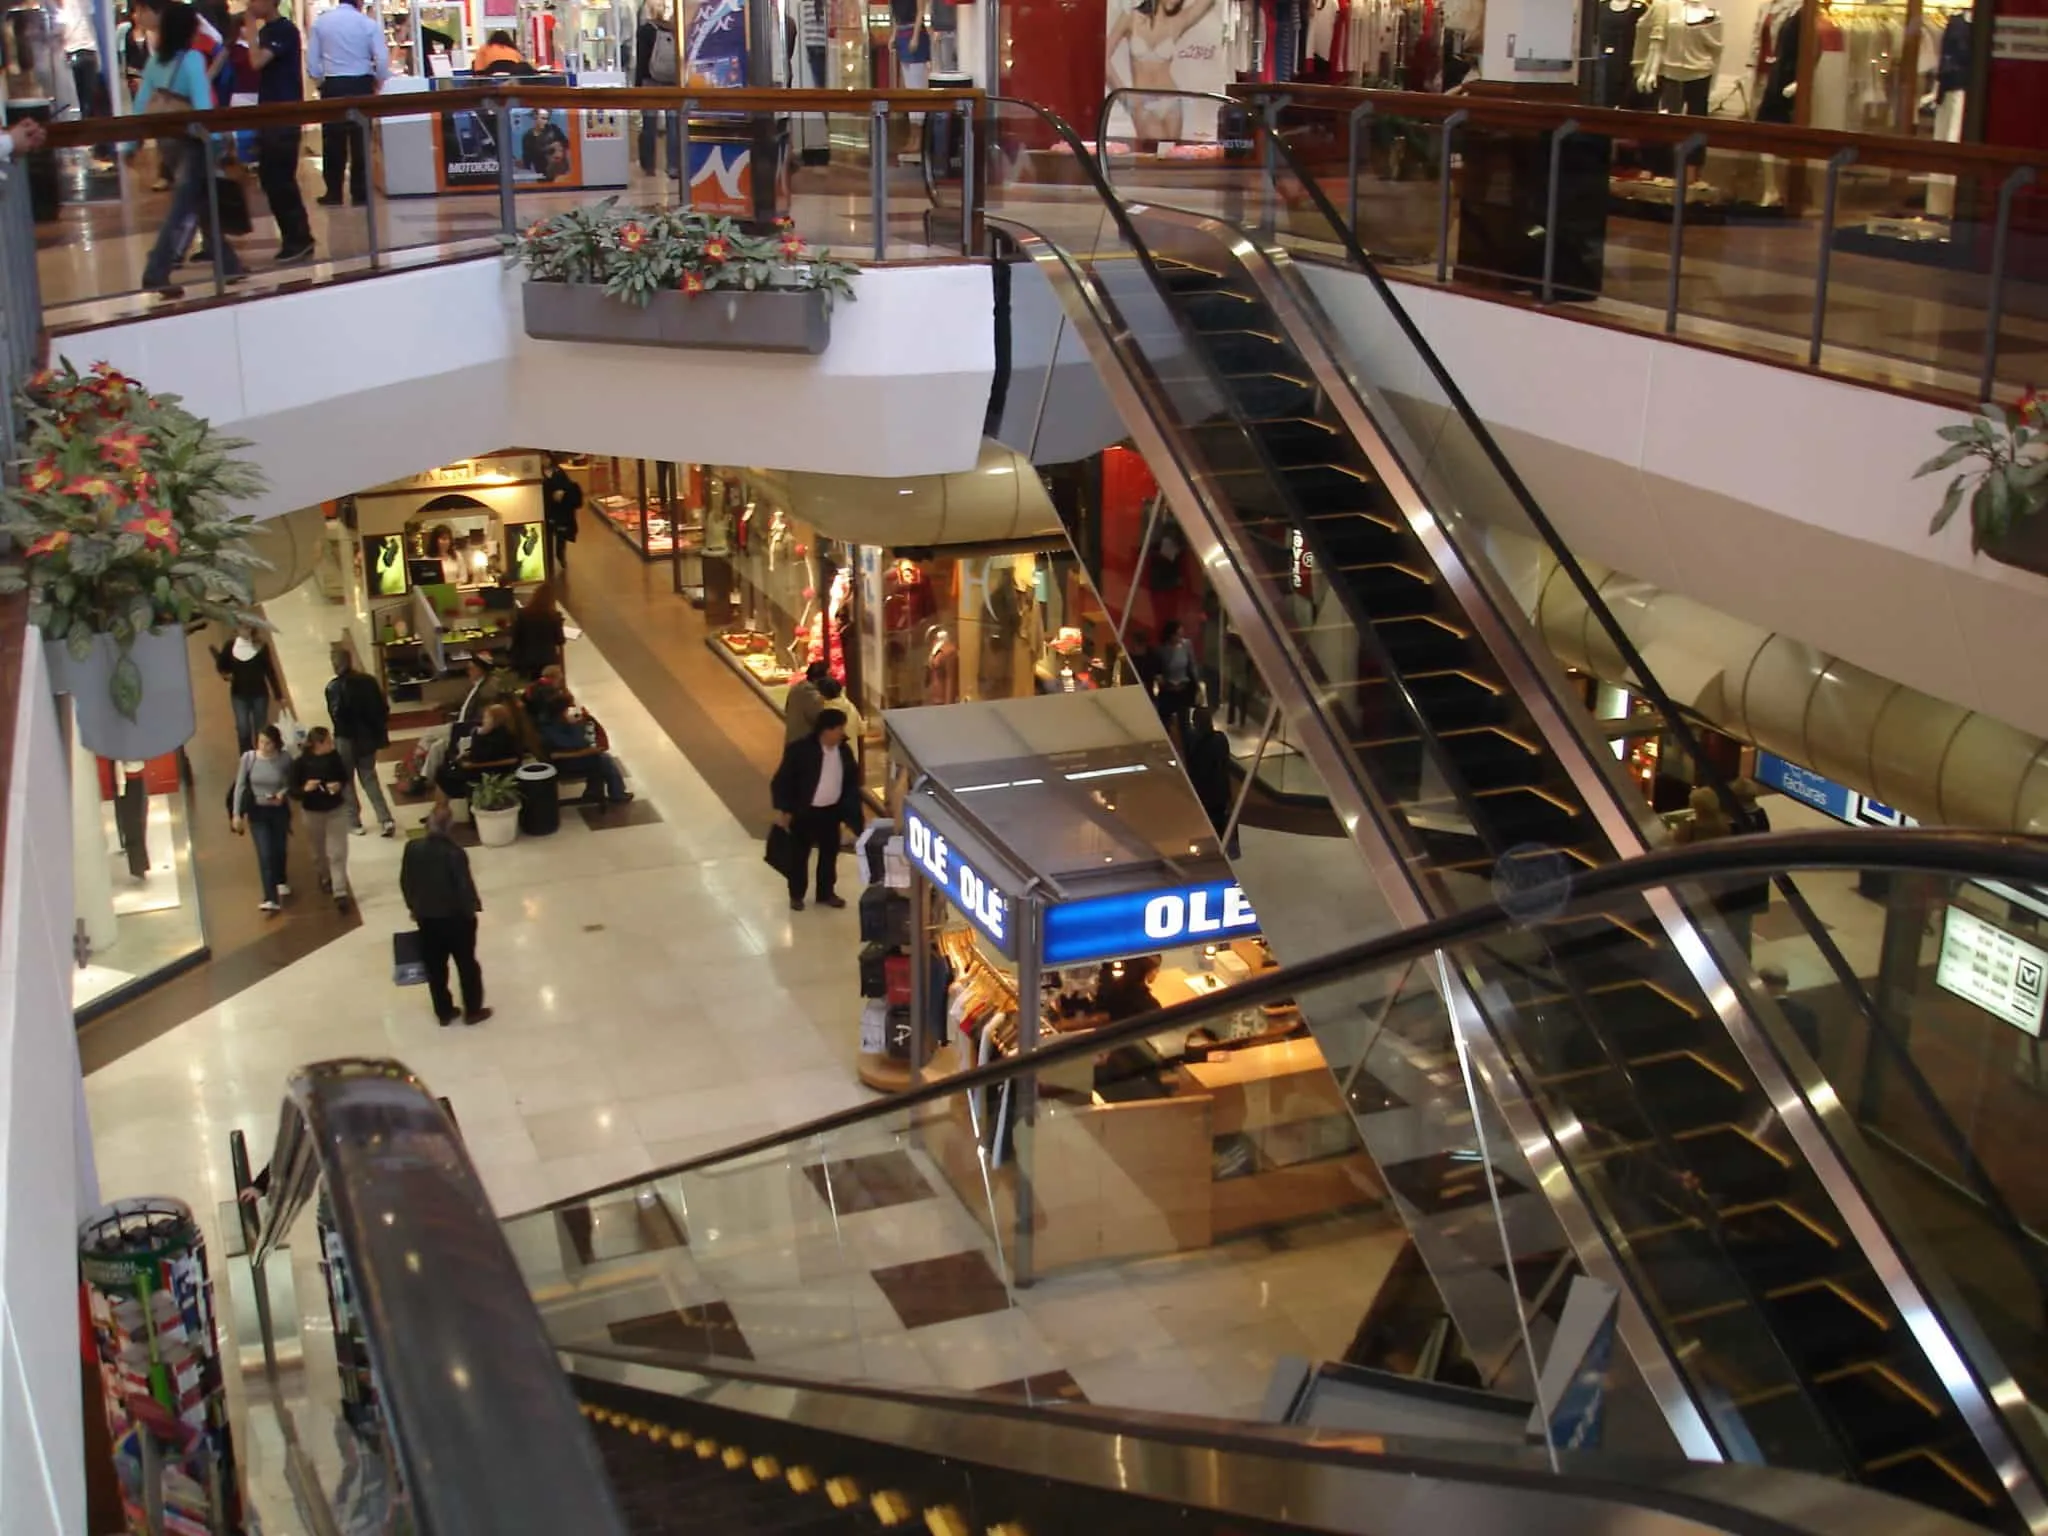 Montevideo Shopping Center in Uruguay, south_america | Shoes,Clothes,Gifts,Cosmetics,Jewelry - Country Helper